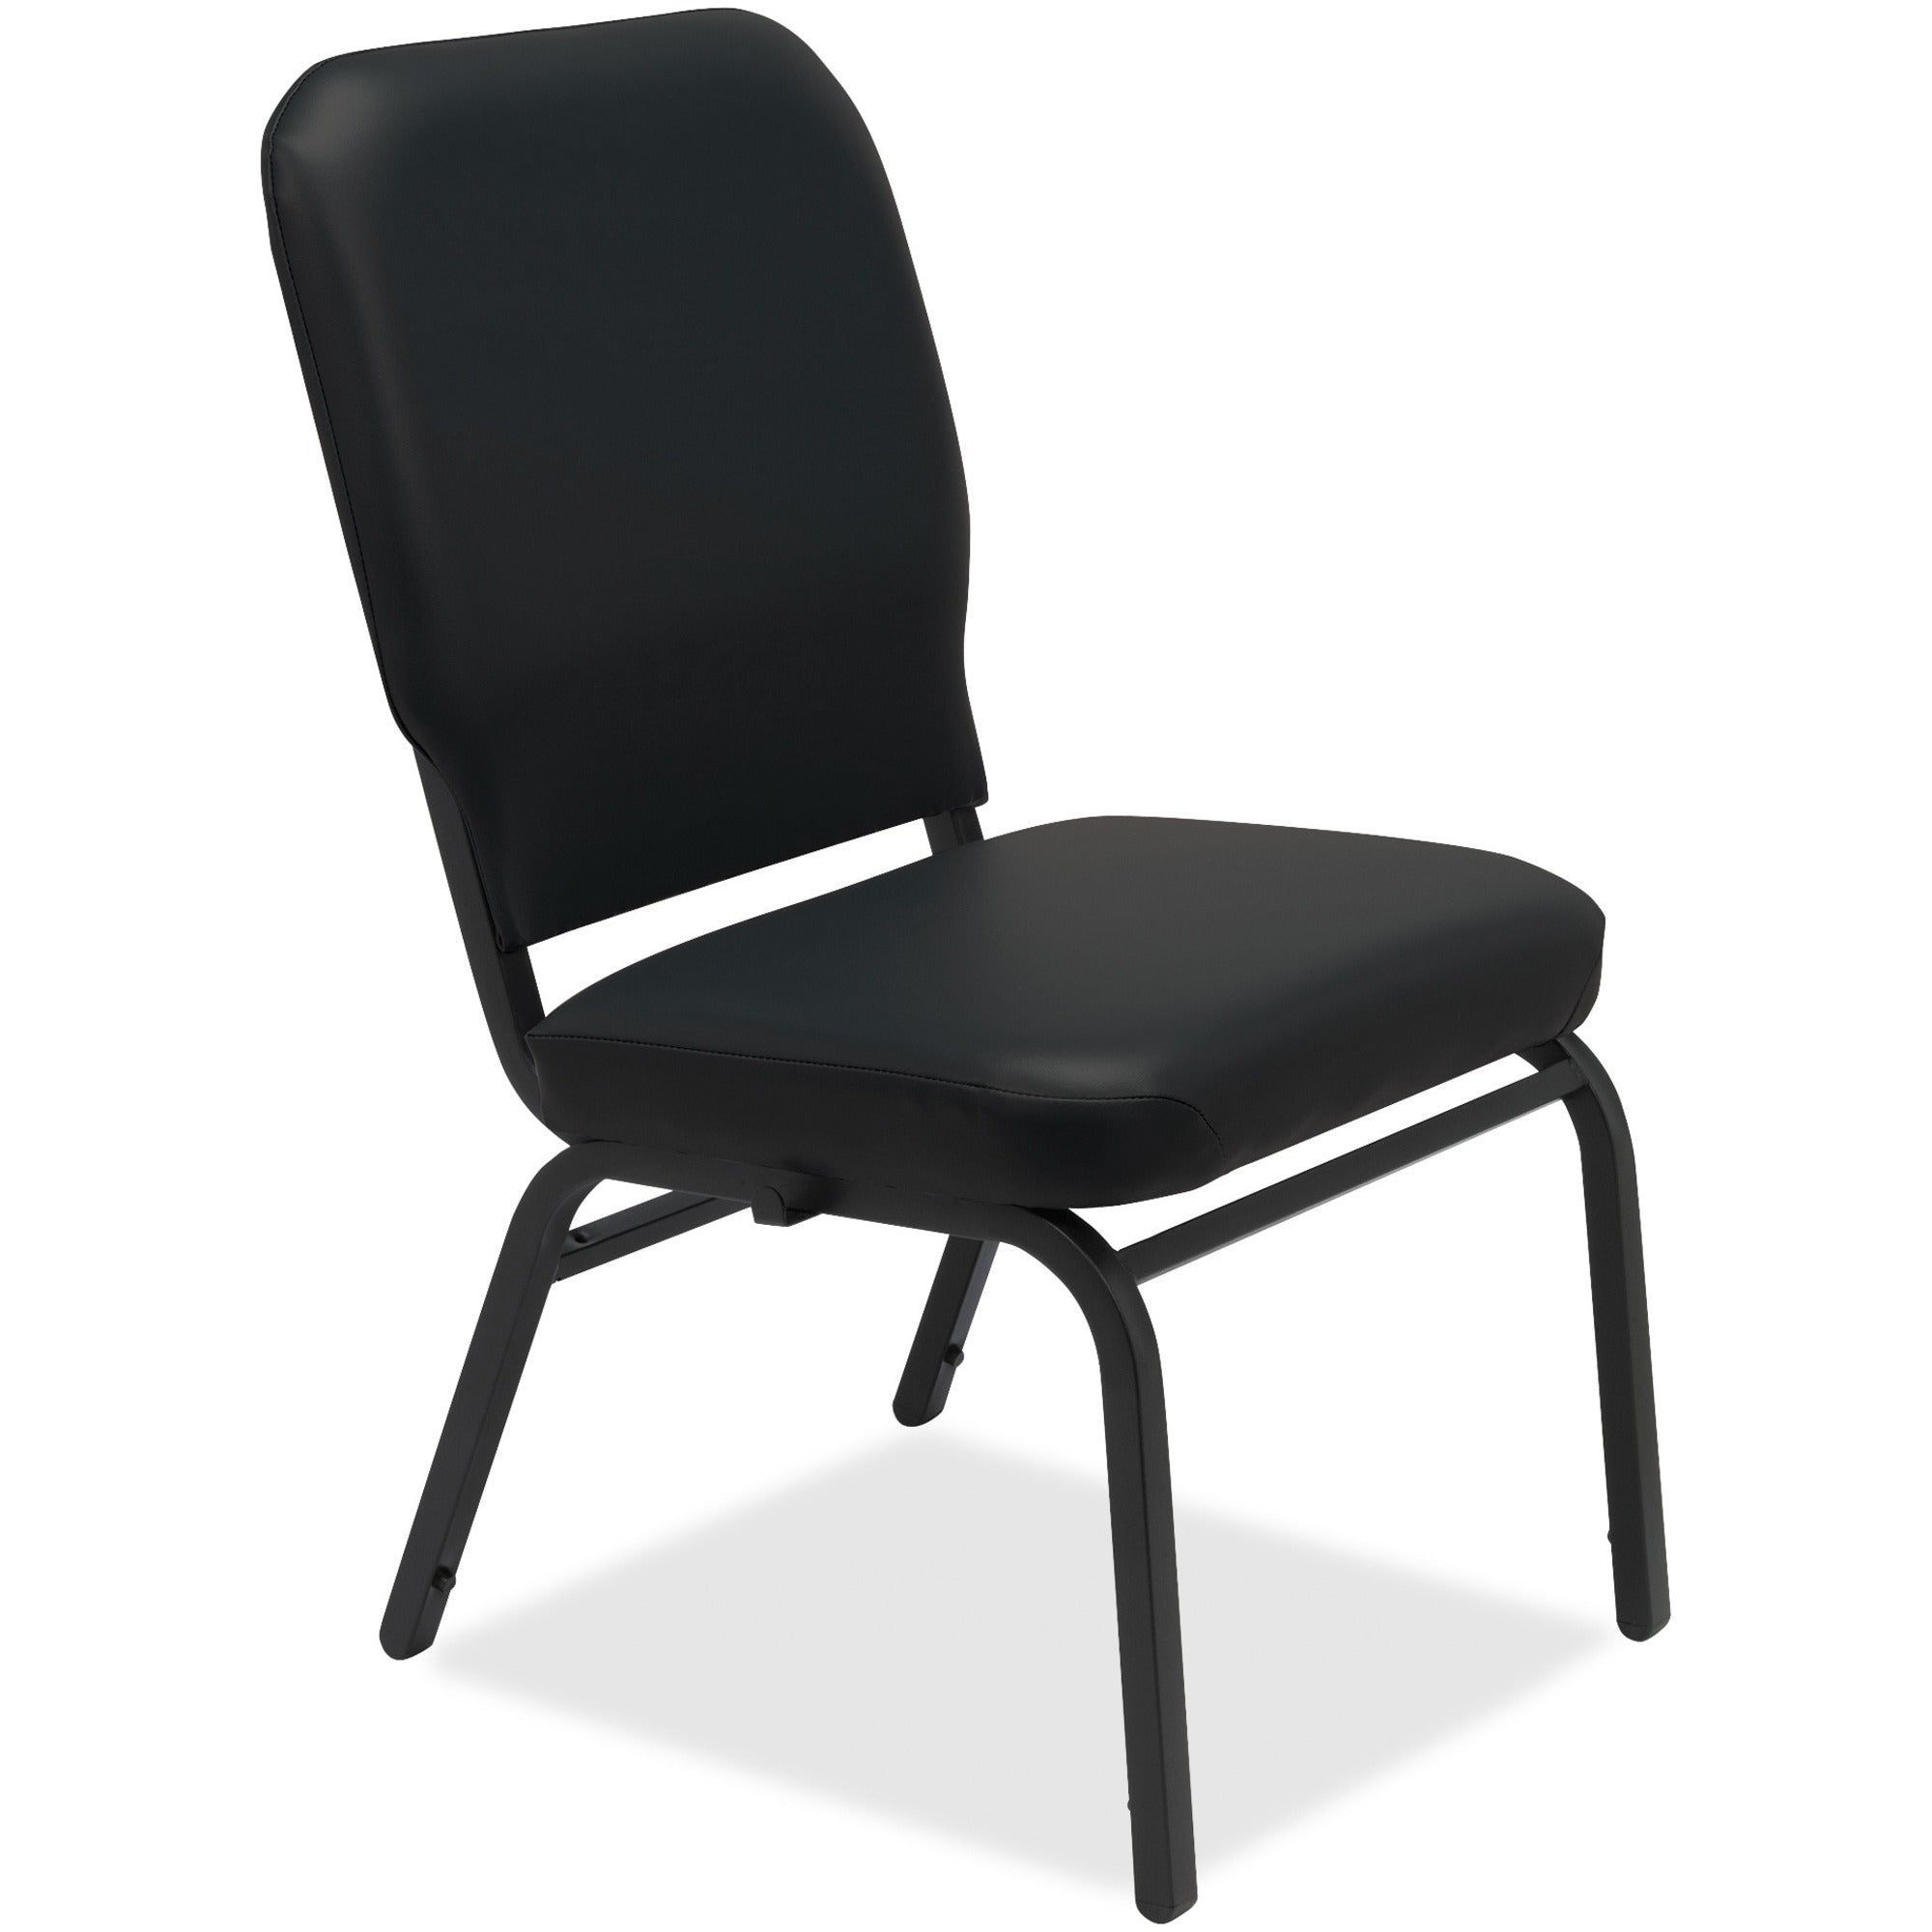 Lorell Oversize Stack Chairs with No Arms - Black Vinyl Seat - Black Vinyl Back - Steel Frame - Four-legged Base - 2 / Carton - 